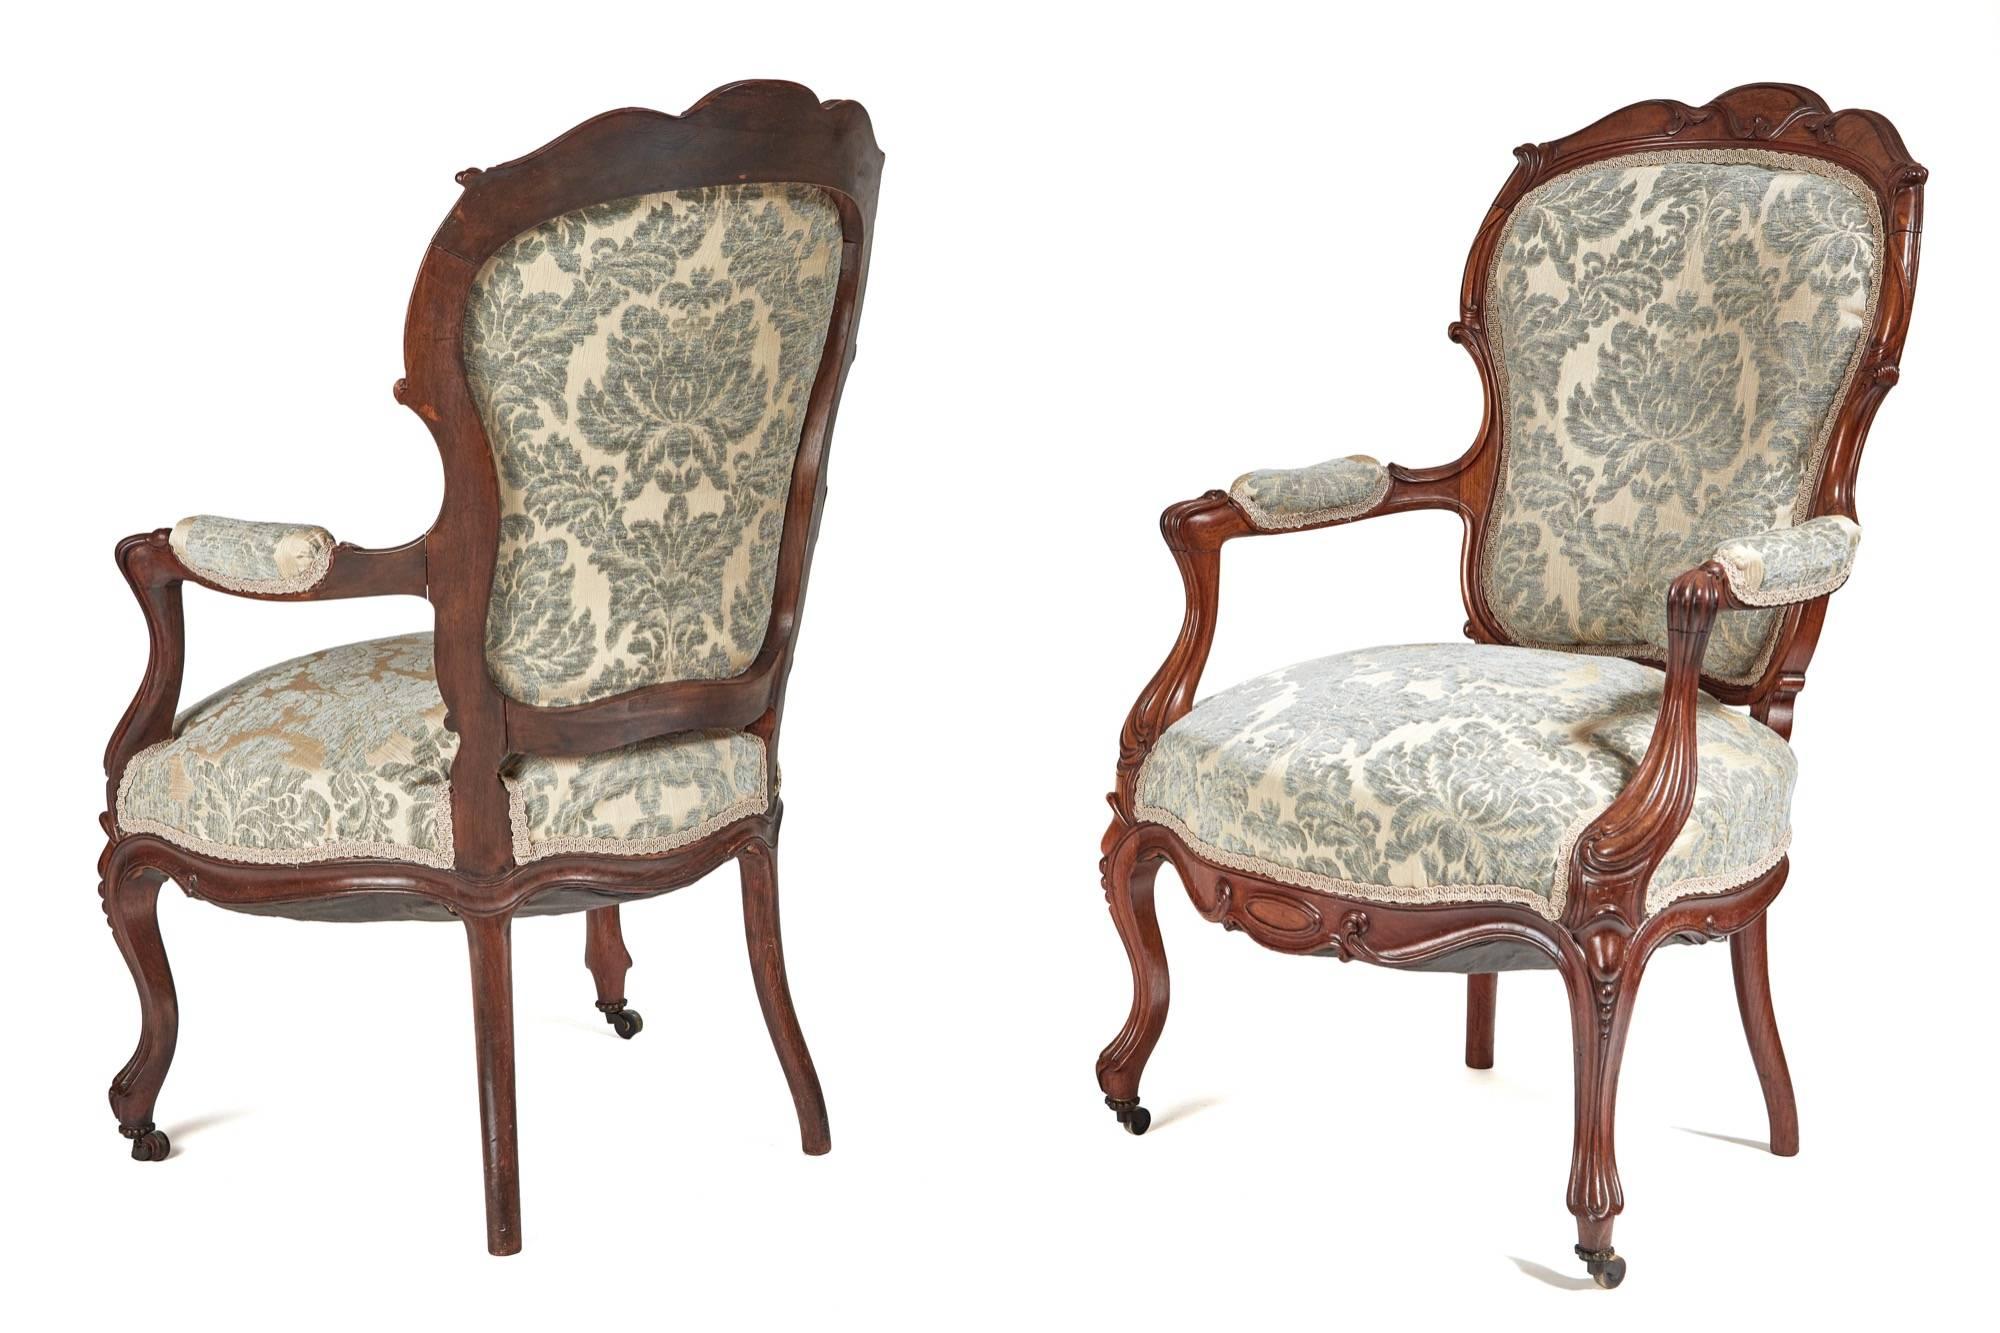 A pair of French rosewood open armchairs, a very rare opportunity to own a matching pair of this quality and condition, lovely shaped back and arms, carvings to the frames, standing on nice cabriole legs to the front outswept back legs, newly